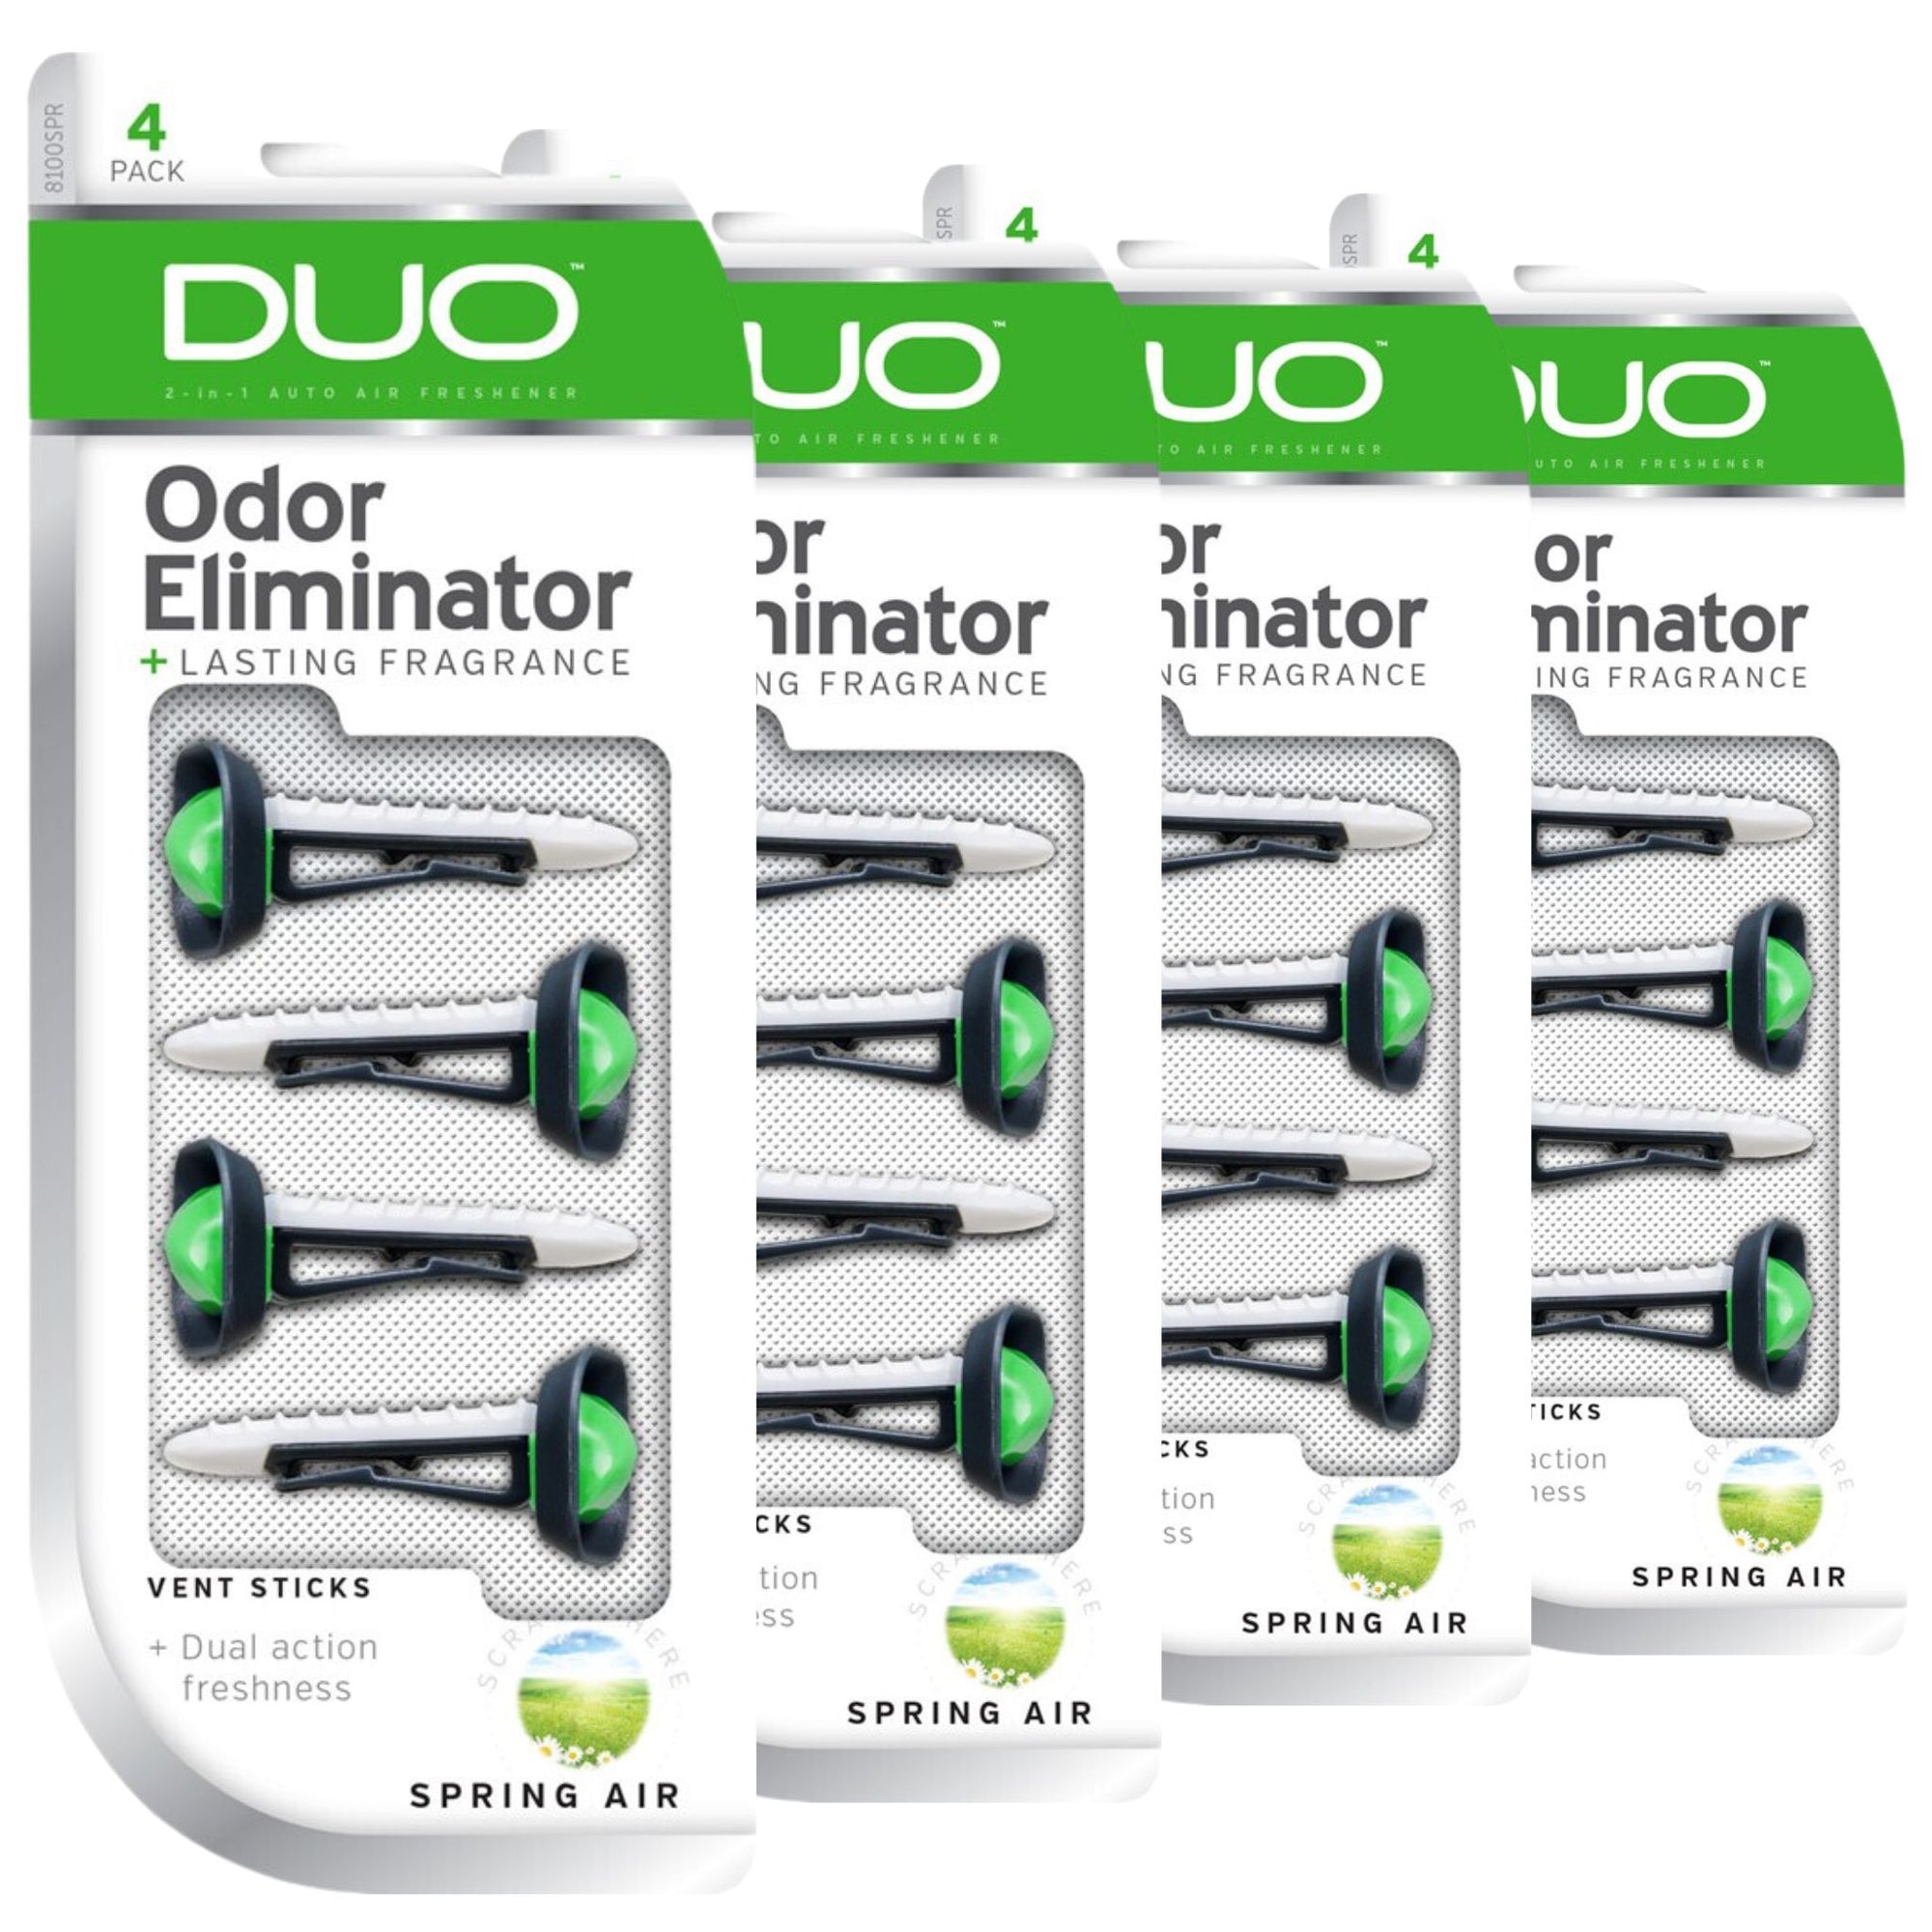 DUO Air Freshener and Odor Eliminator Vent Sticks - Spring Air - (16 Sticks) - South East Clearance Centre